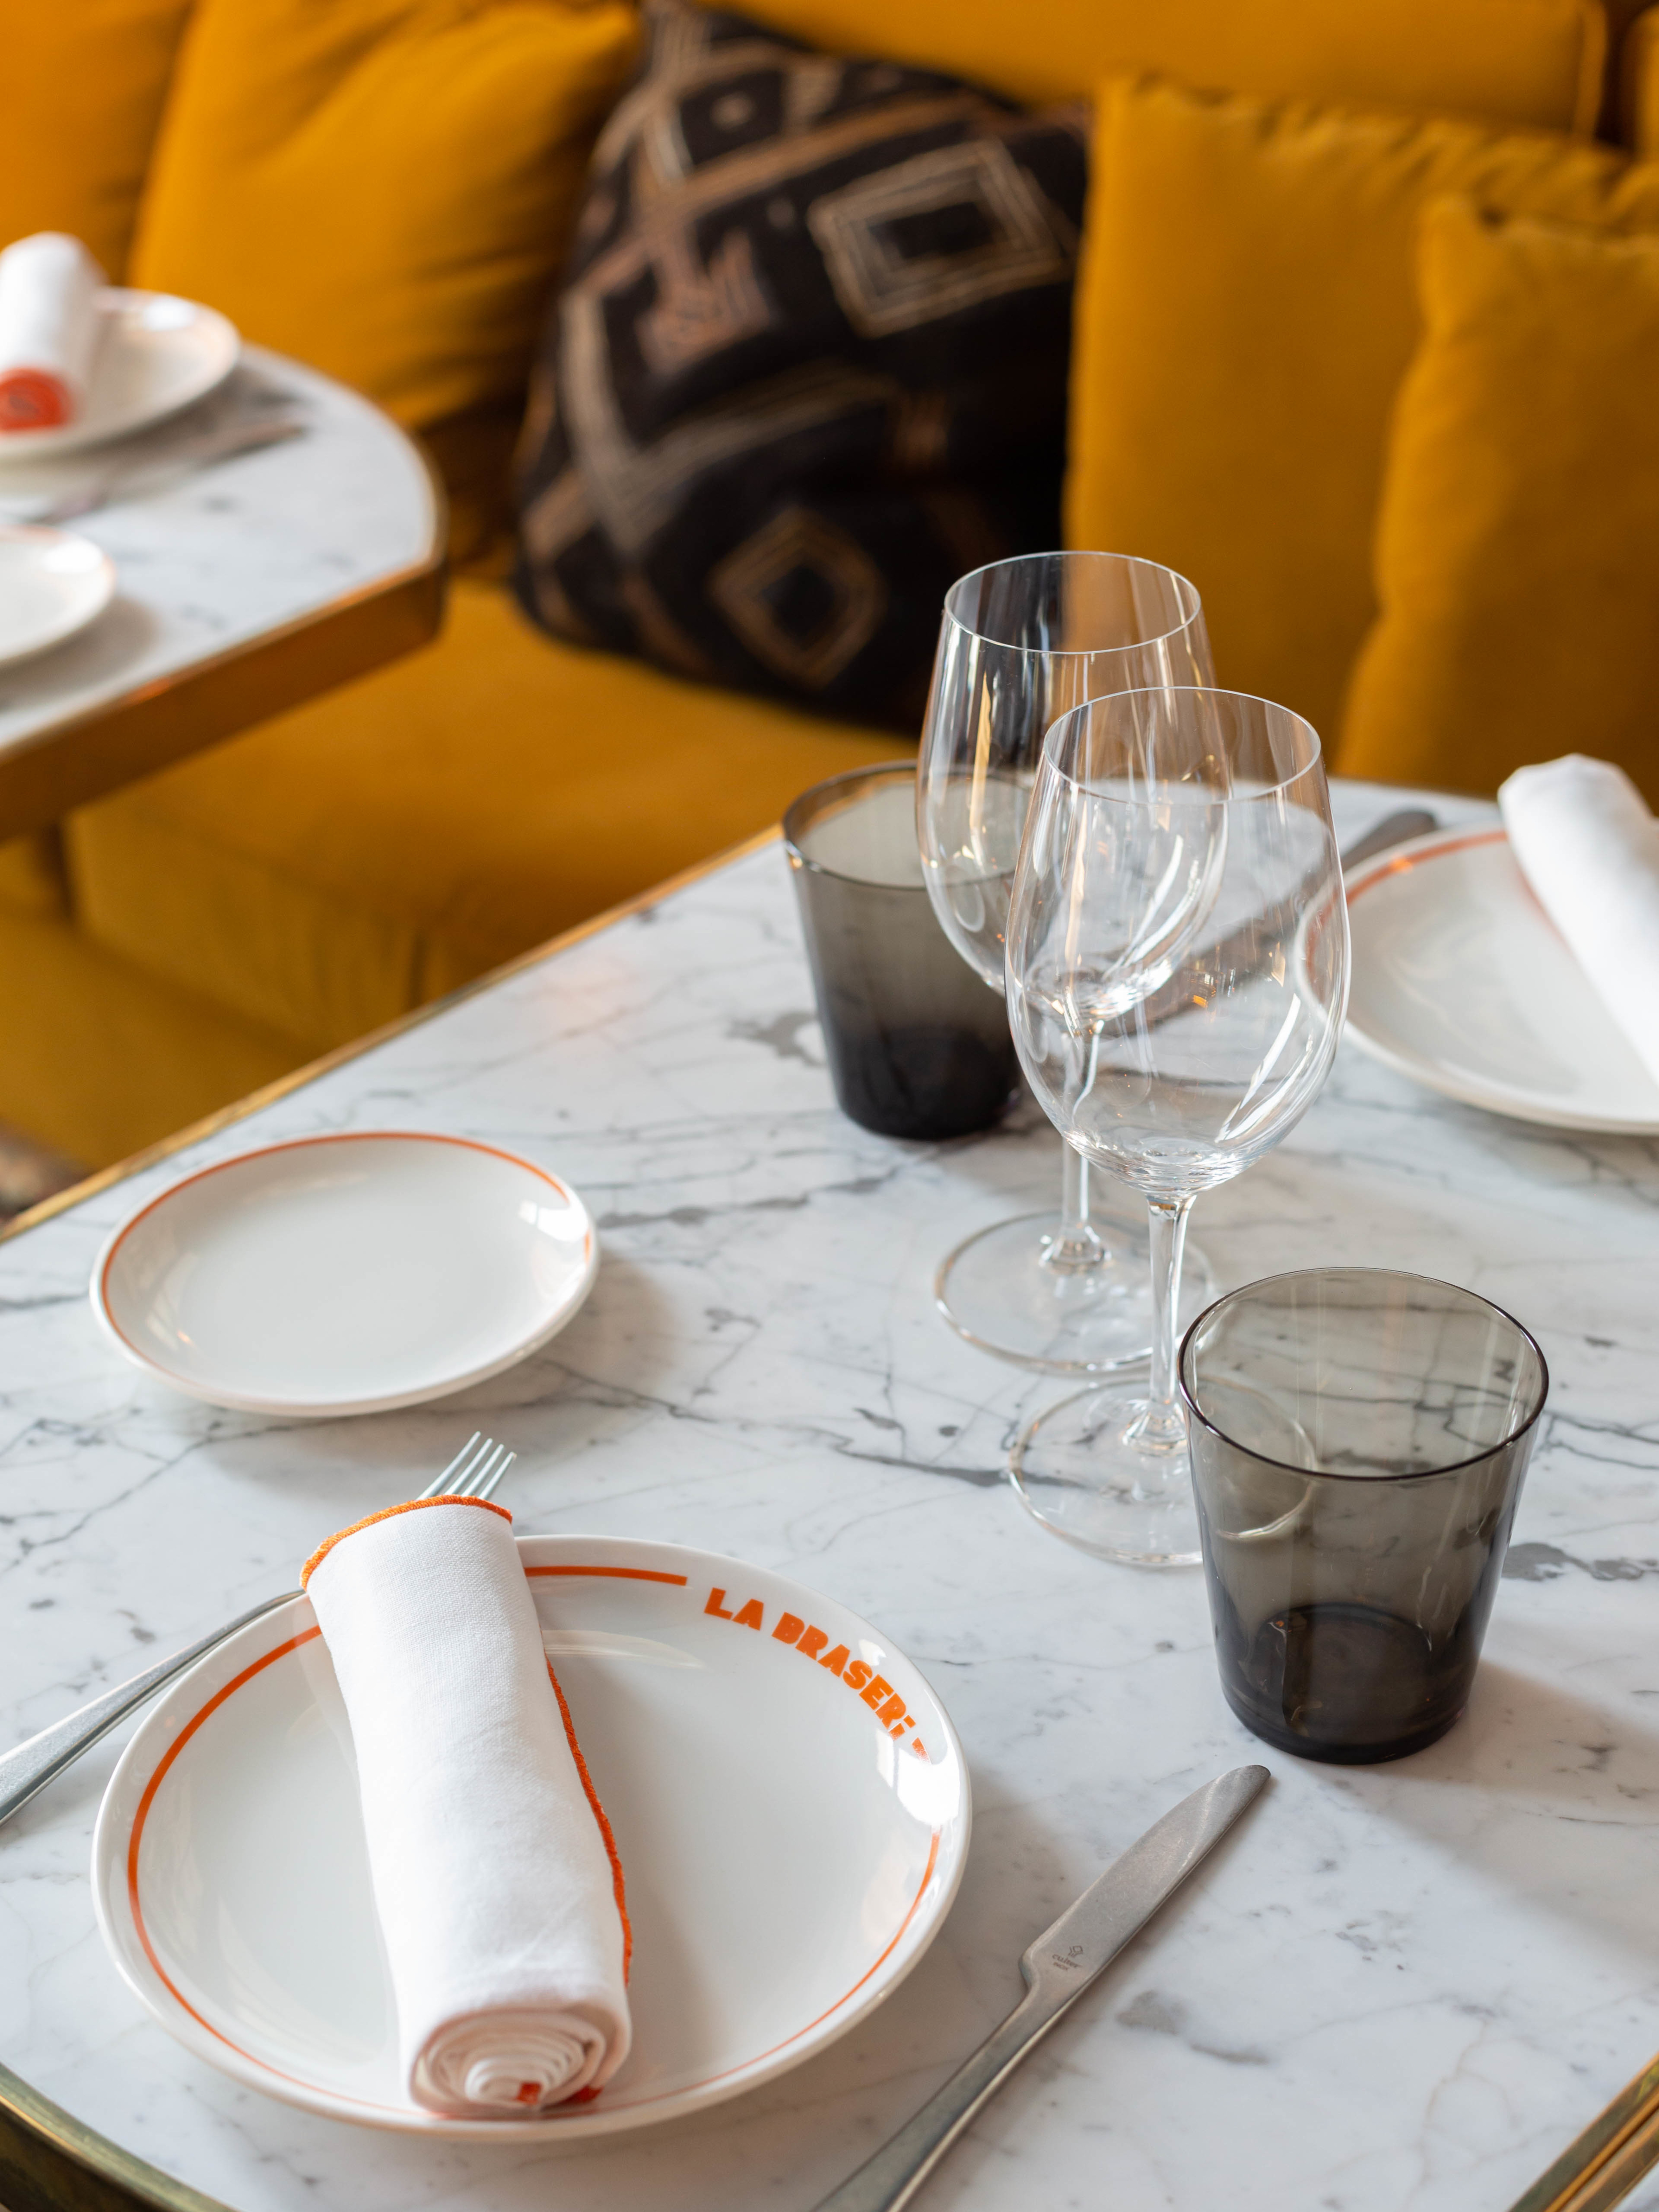 Restaurant table with glasses and crockery